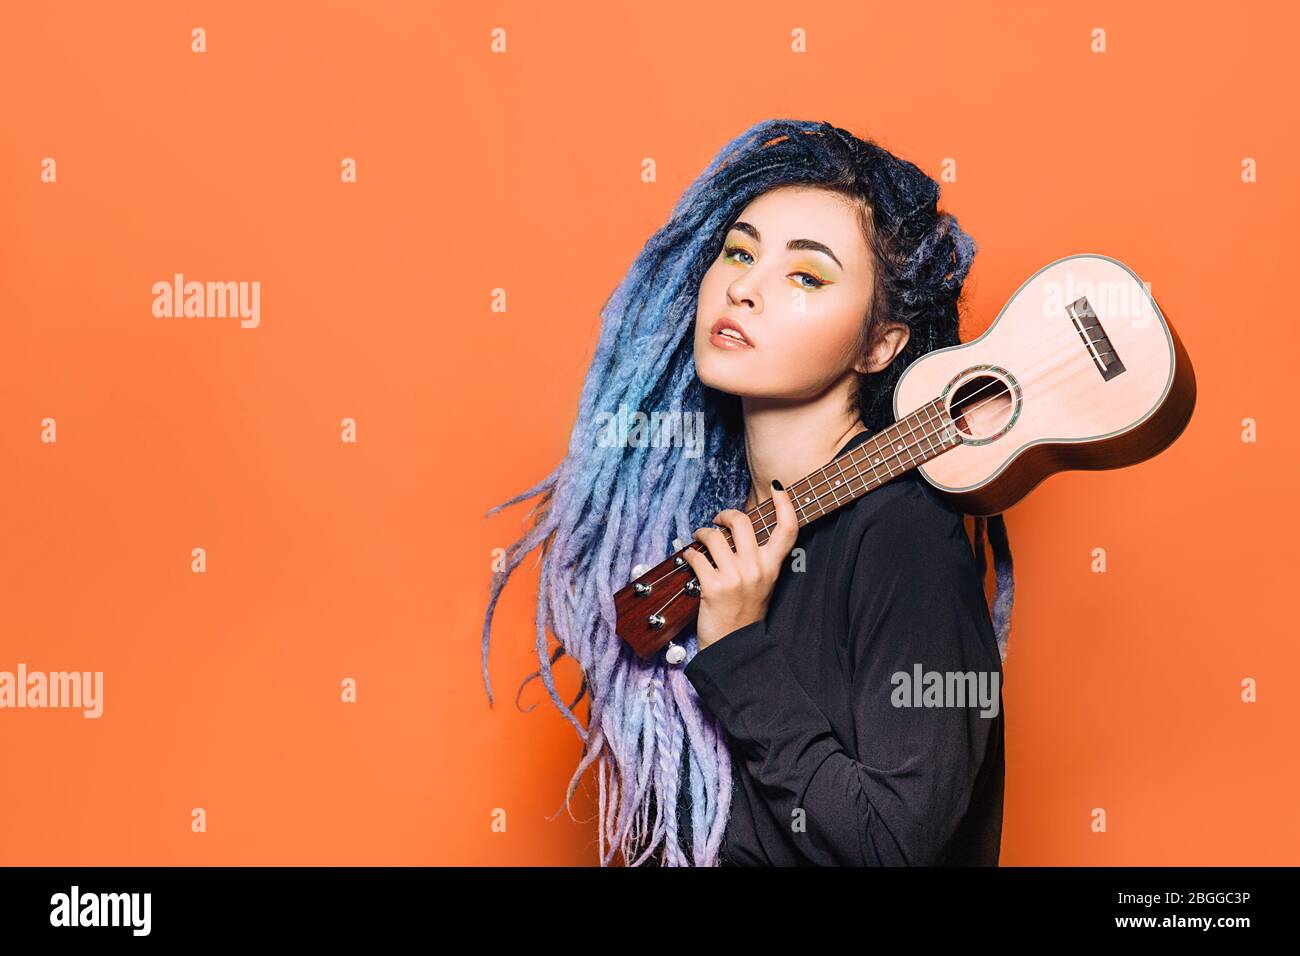 portrait of hipster woman with violet dreadlocks and ukulele in her hands on an orange background Stock Photo